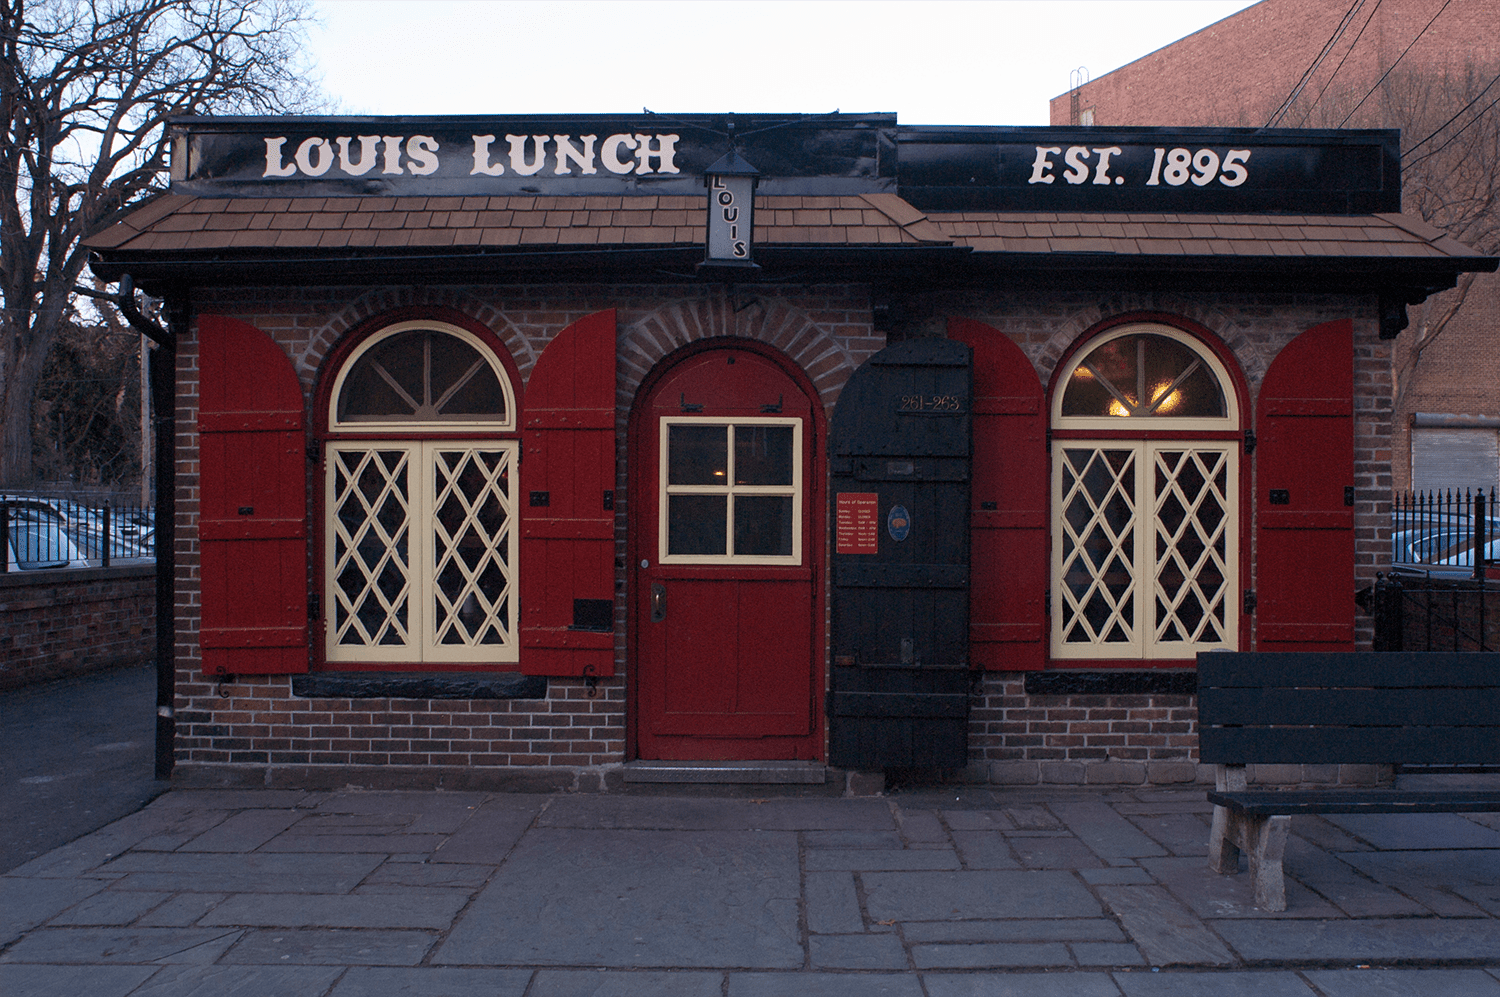 Louis Lunch New Haven CT Birthplace of the Hamburger